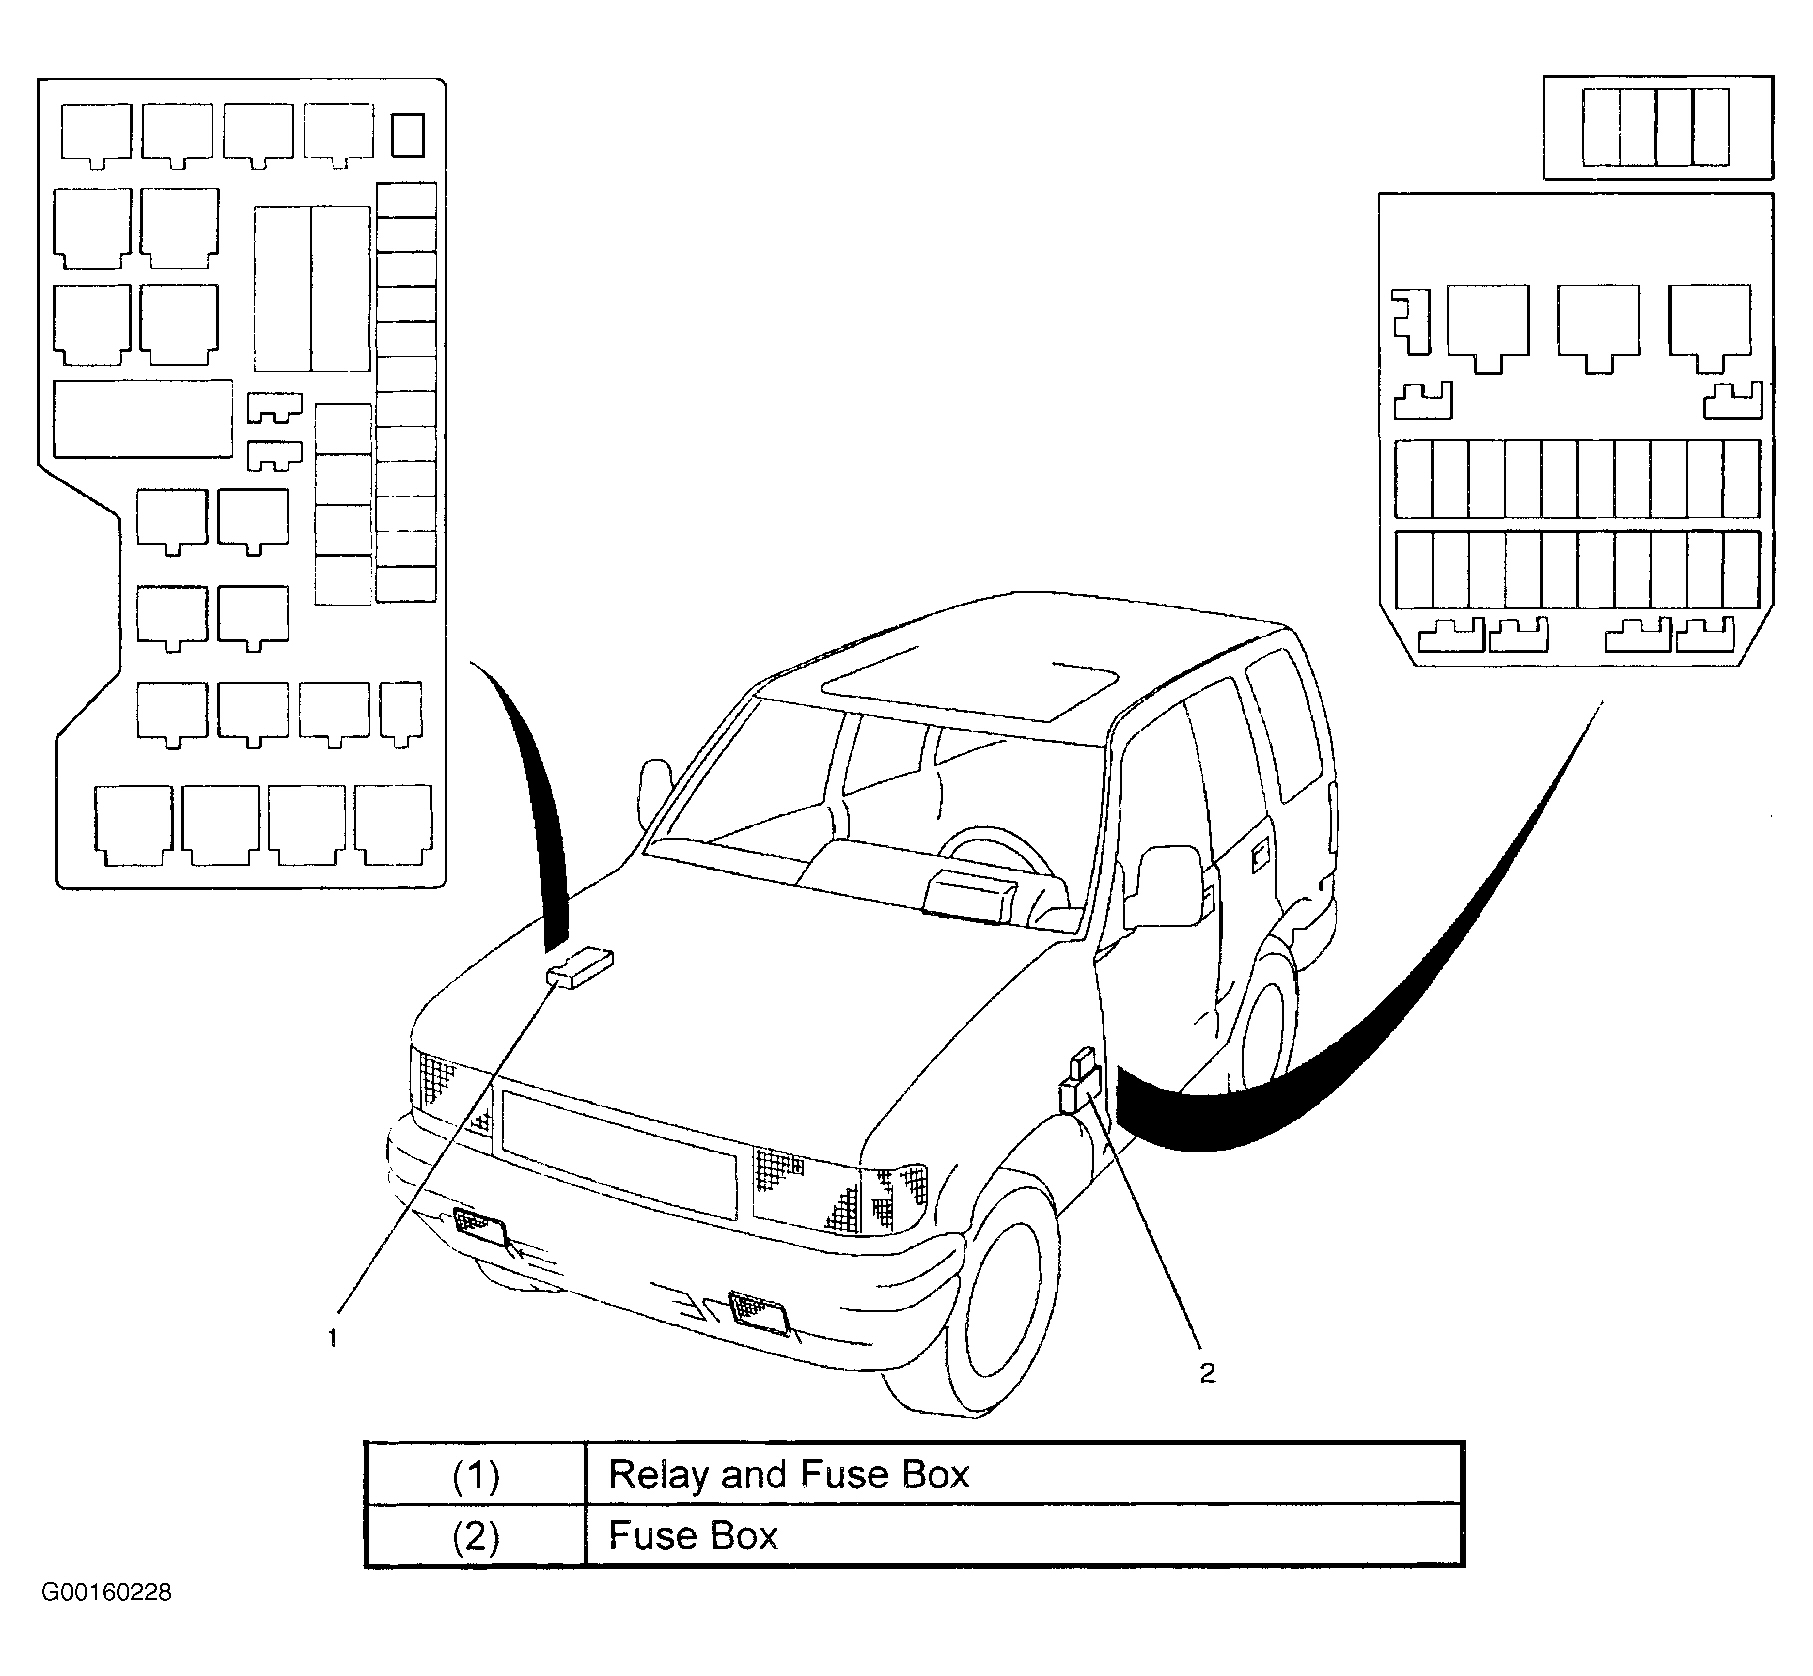 Isuzu Trooper Limited 2000 - Component Locations -  Identifying FuseBox; Relay & Fuse Box Locations